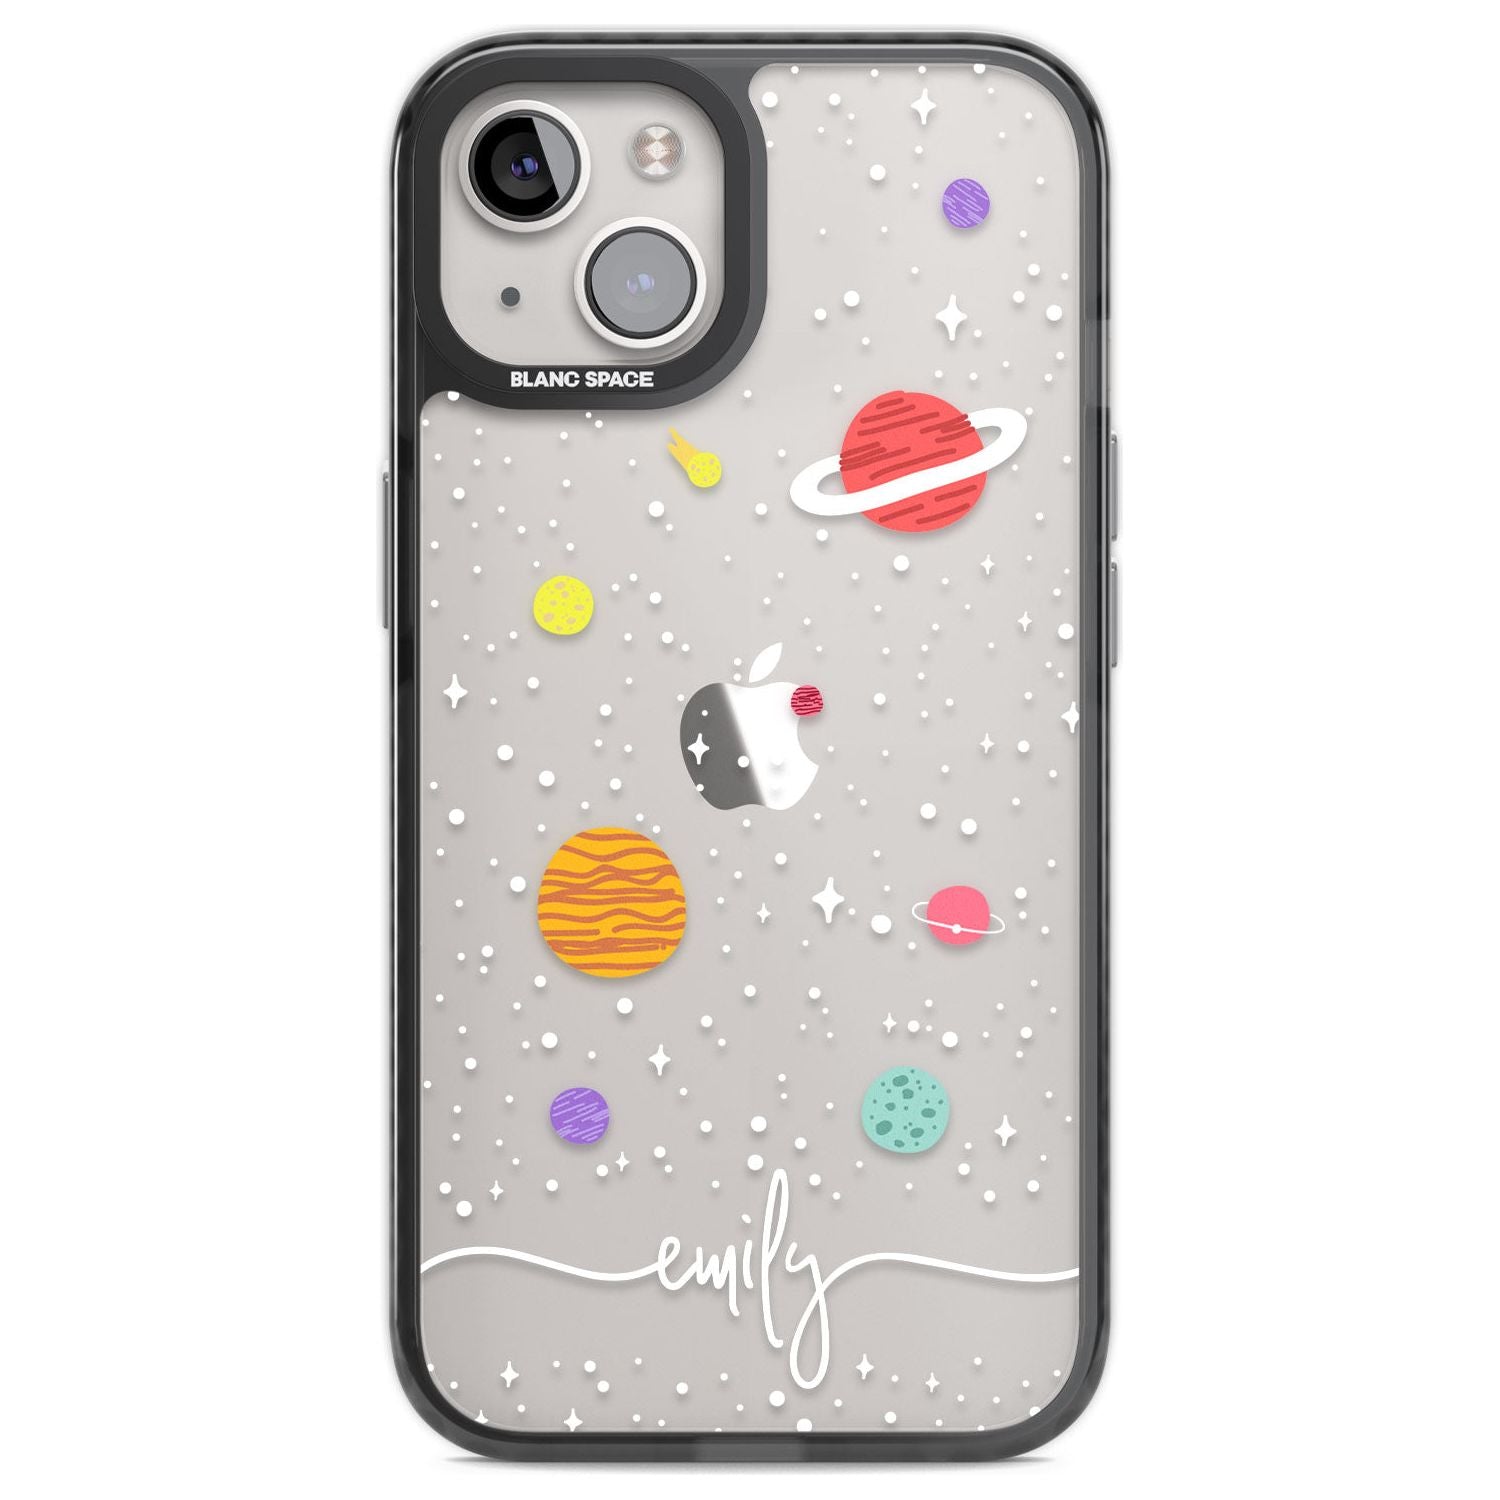 Personalised Cute Cartoon Planets (Clear) Phone Case iPhone 12 / Black Impact Case,iPhone 13 / Black Impact Case,iPhone 12 Pro / Black Impact Case,iPhone 14 / Black Impact Case,iPhone 15 Plus / Black Impact Case,iPhone 15 / Black Impact Case Blanc Space